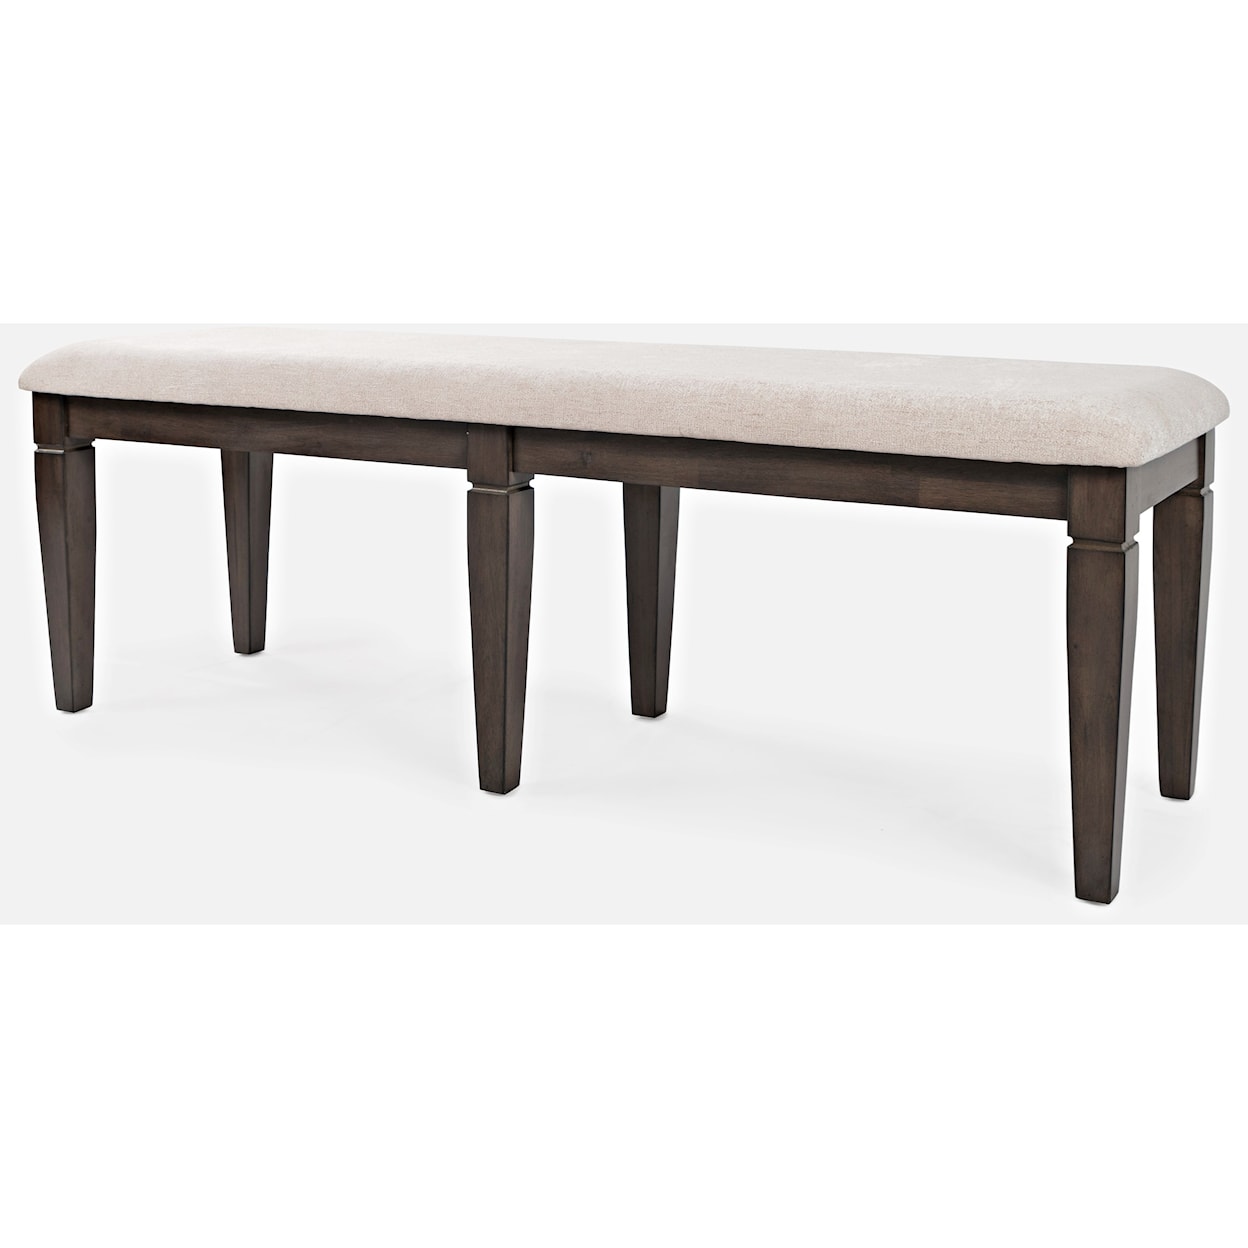 Jofran Lincoln Square Dining Bench